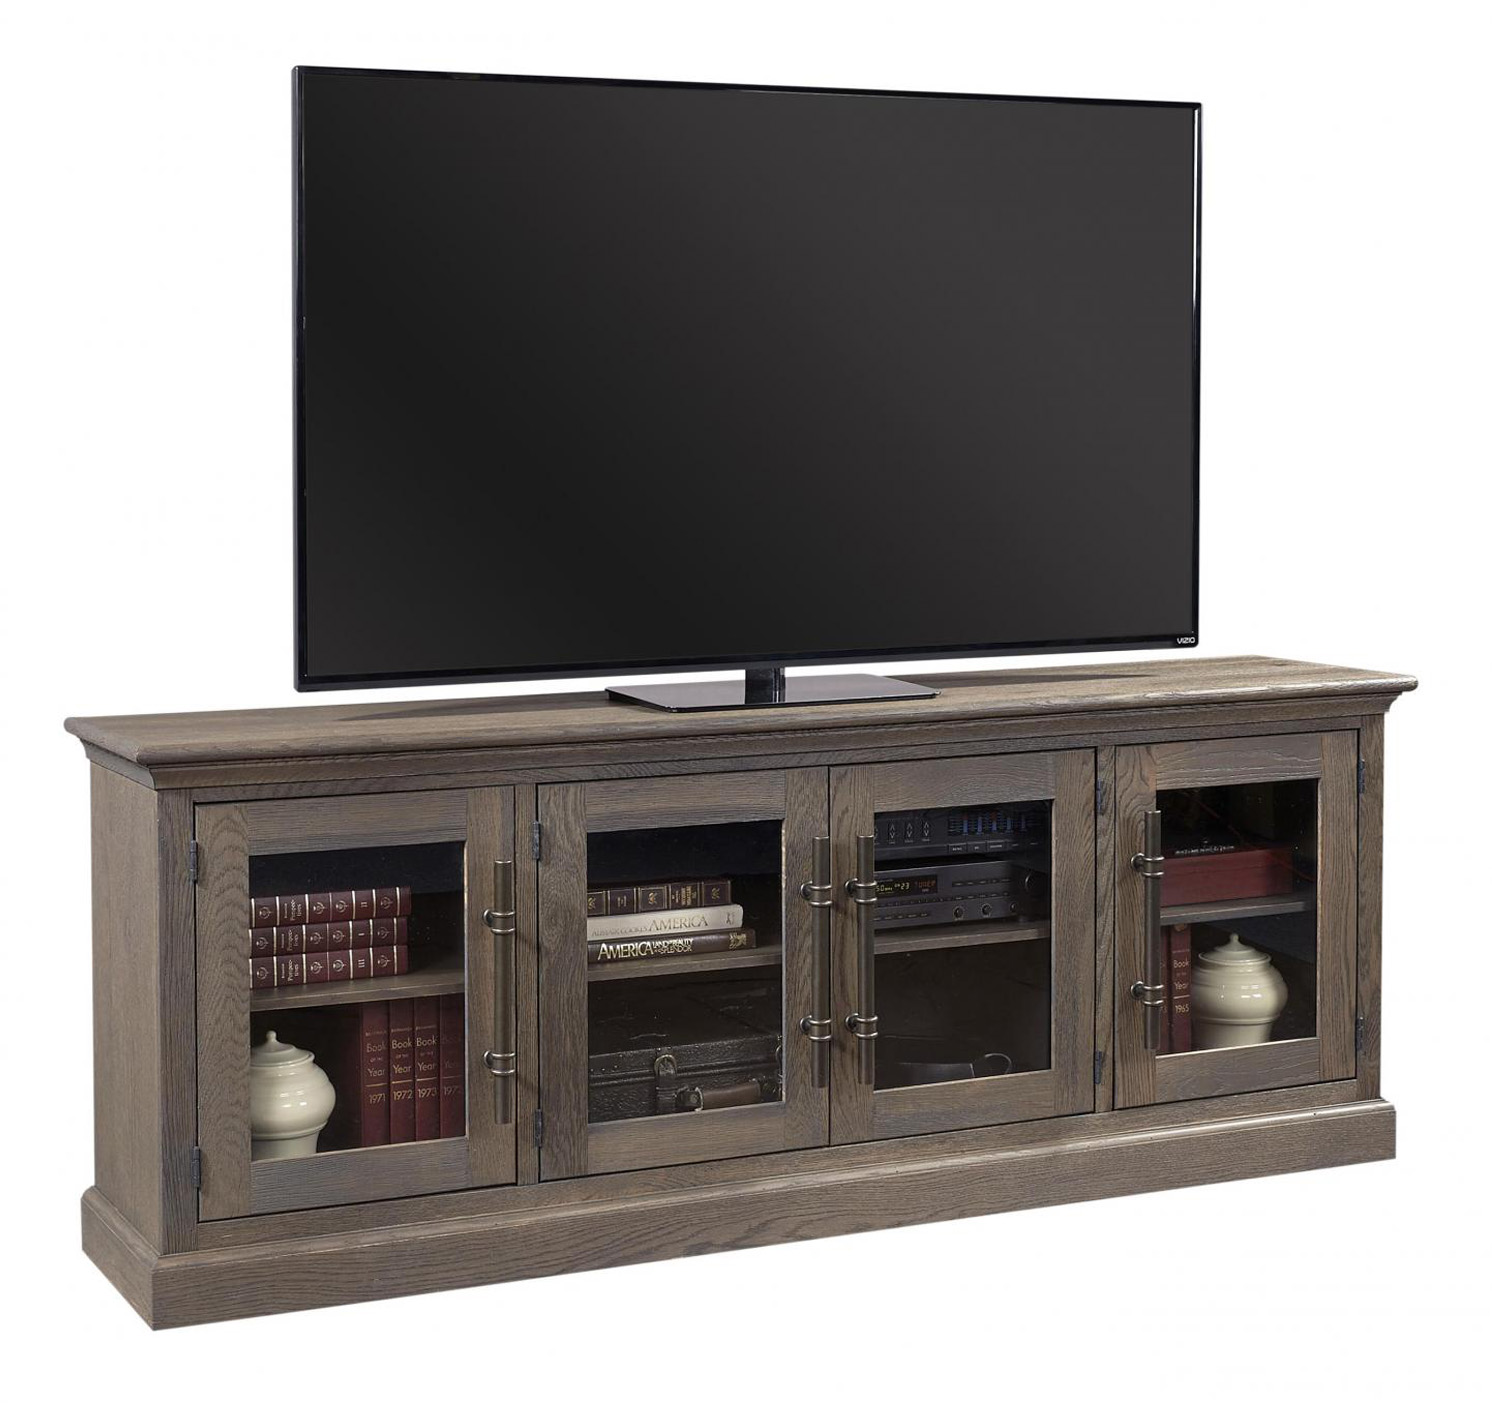 Manchester 85" Console w/ 4 Doors in the Glazed Oak finish